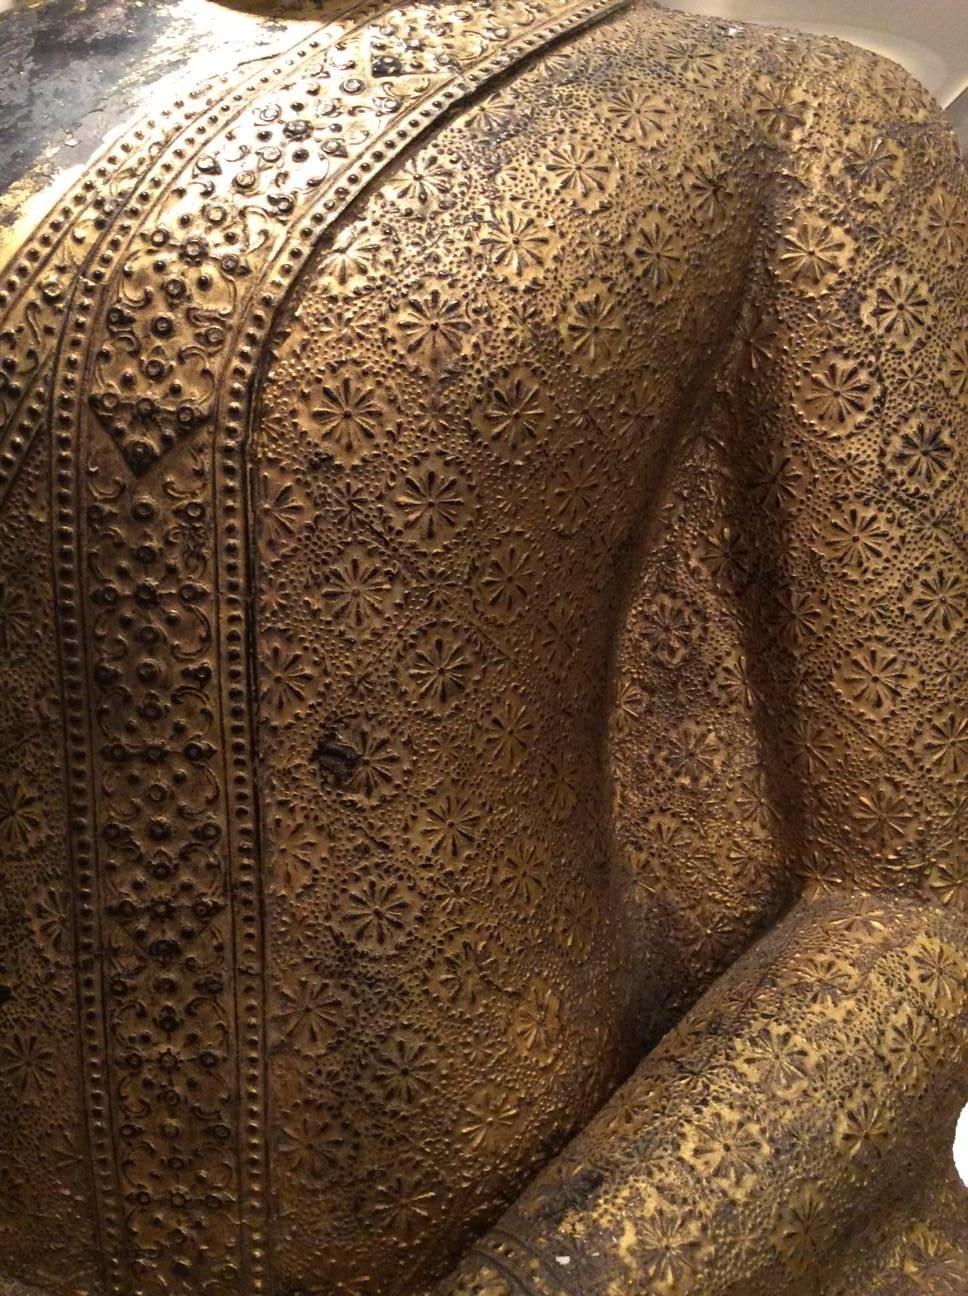 Large Buddha, Rattanakosin style (second half of the 19th century) in one of the most common iconic images of Buddhism: The bhūmisparśa or 